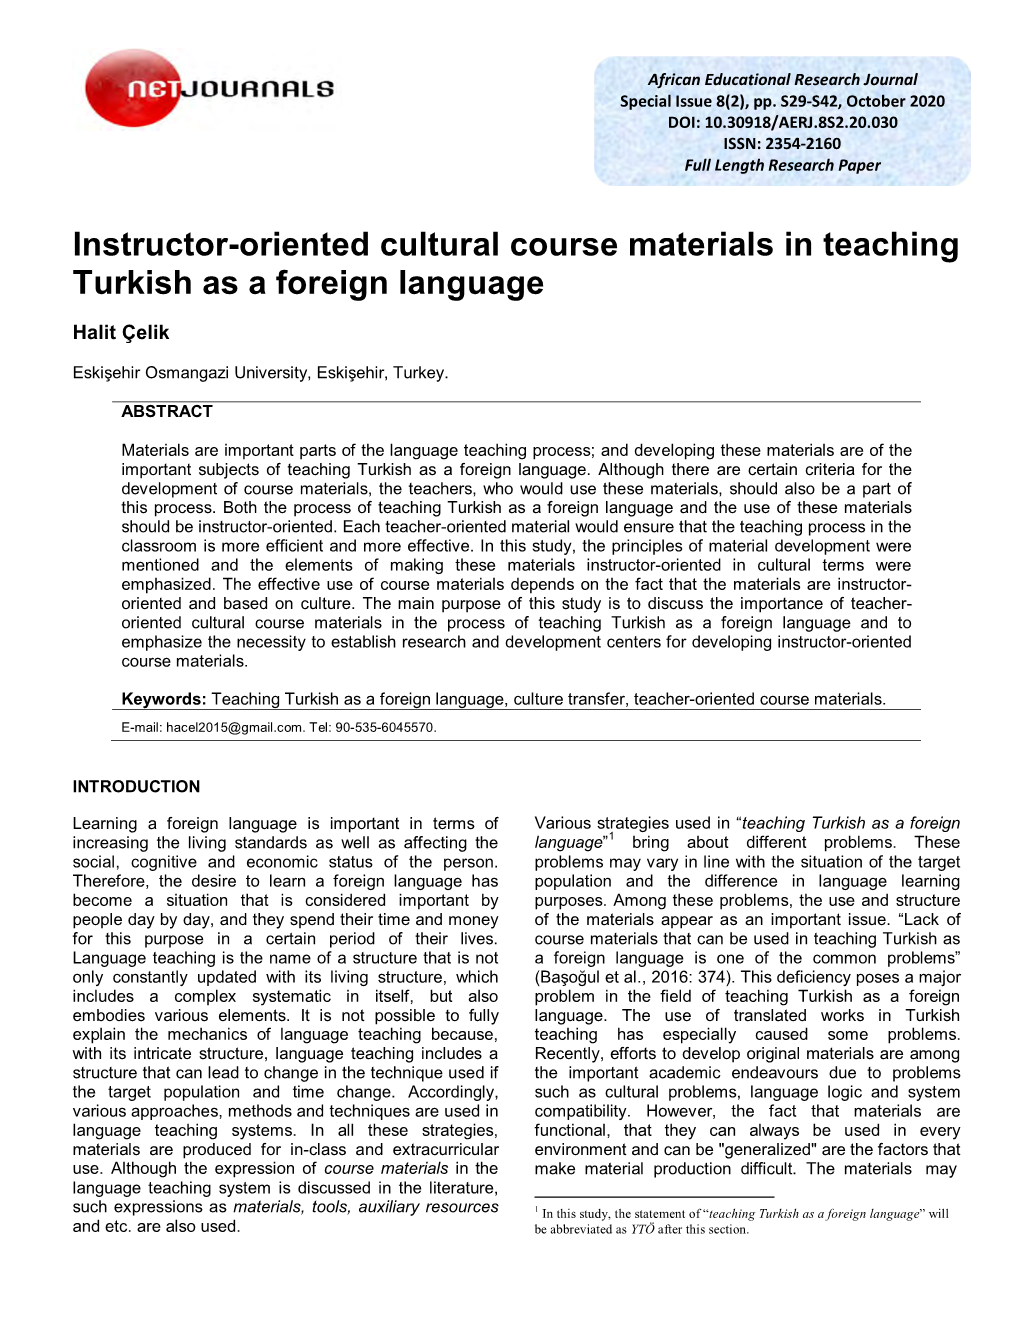 Instructor-Oriented Cultural Course Materials in Teaching Turkish As a Foreign Language